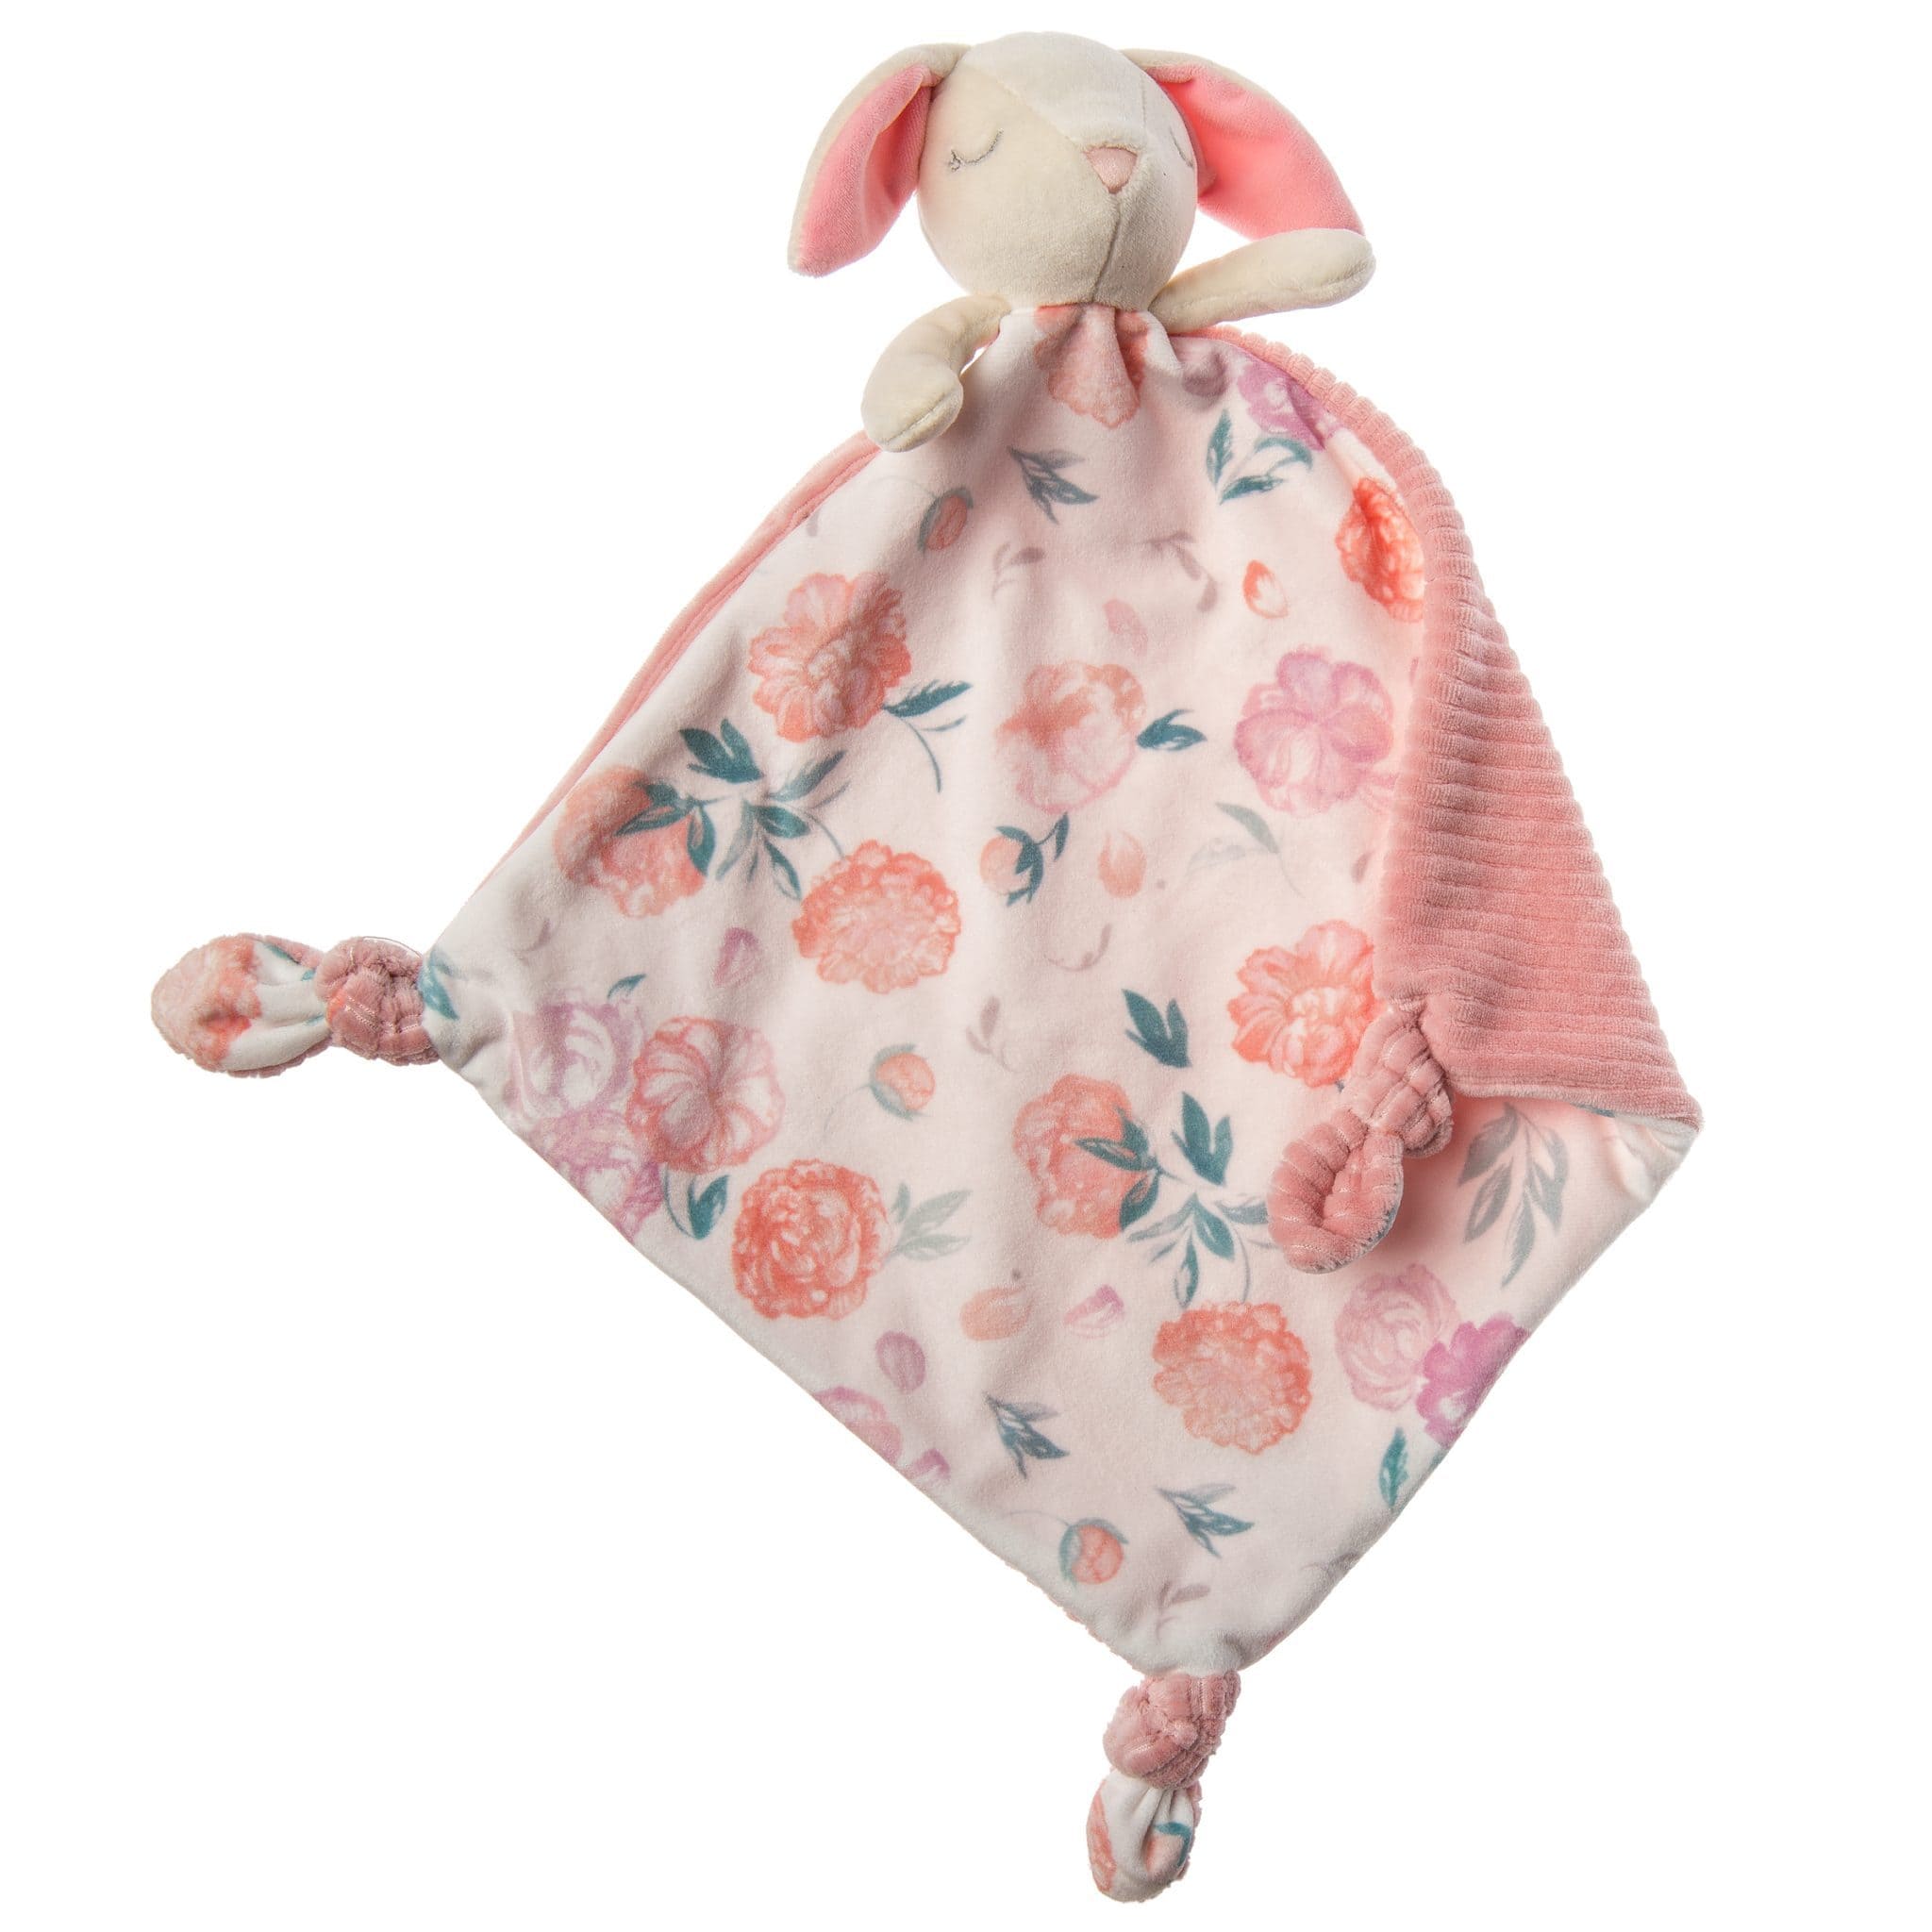 Little Knottie Bunny Comforter by Mary Meyer - Bumbles &amp; Boo